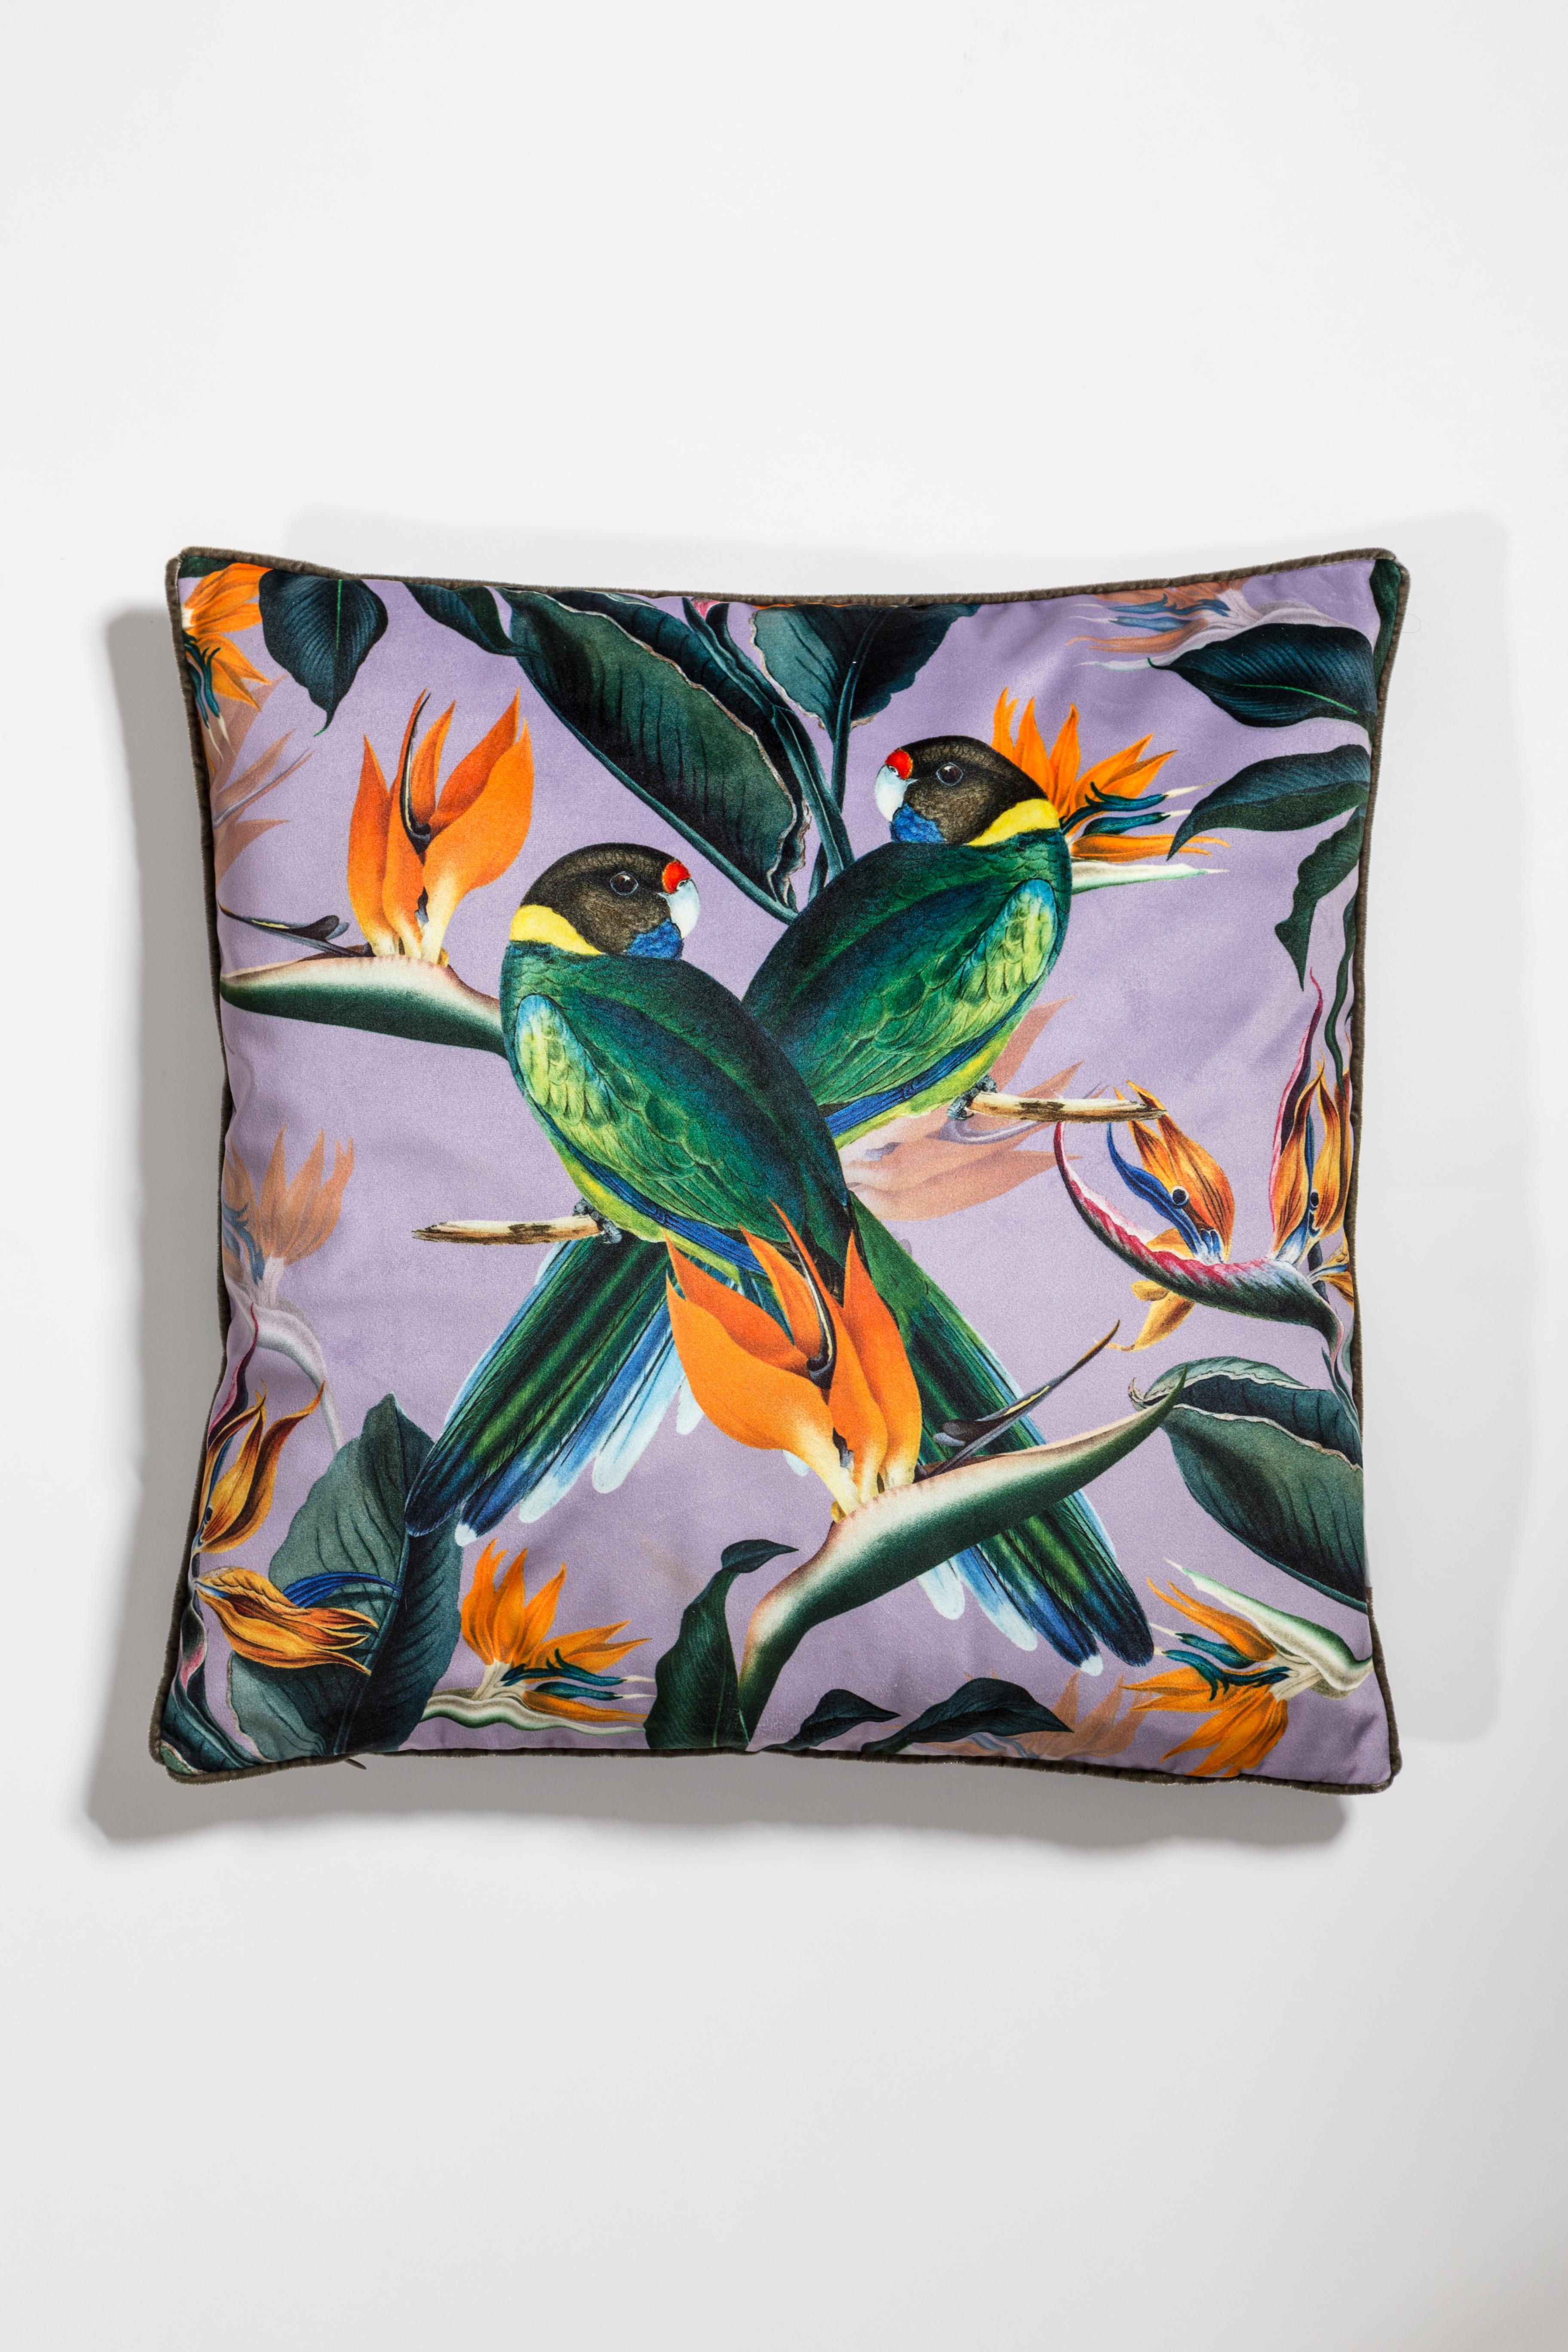 Animalia pillows is a set of cushions that tells the story of wild animals looking for love in spring time. Each Pillow features two animals of the same species set in an explosion of flowers and vegetation. On the backside of the cushion there's a